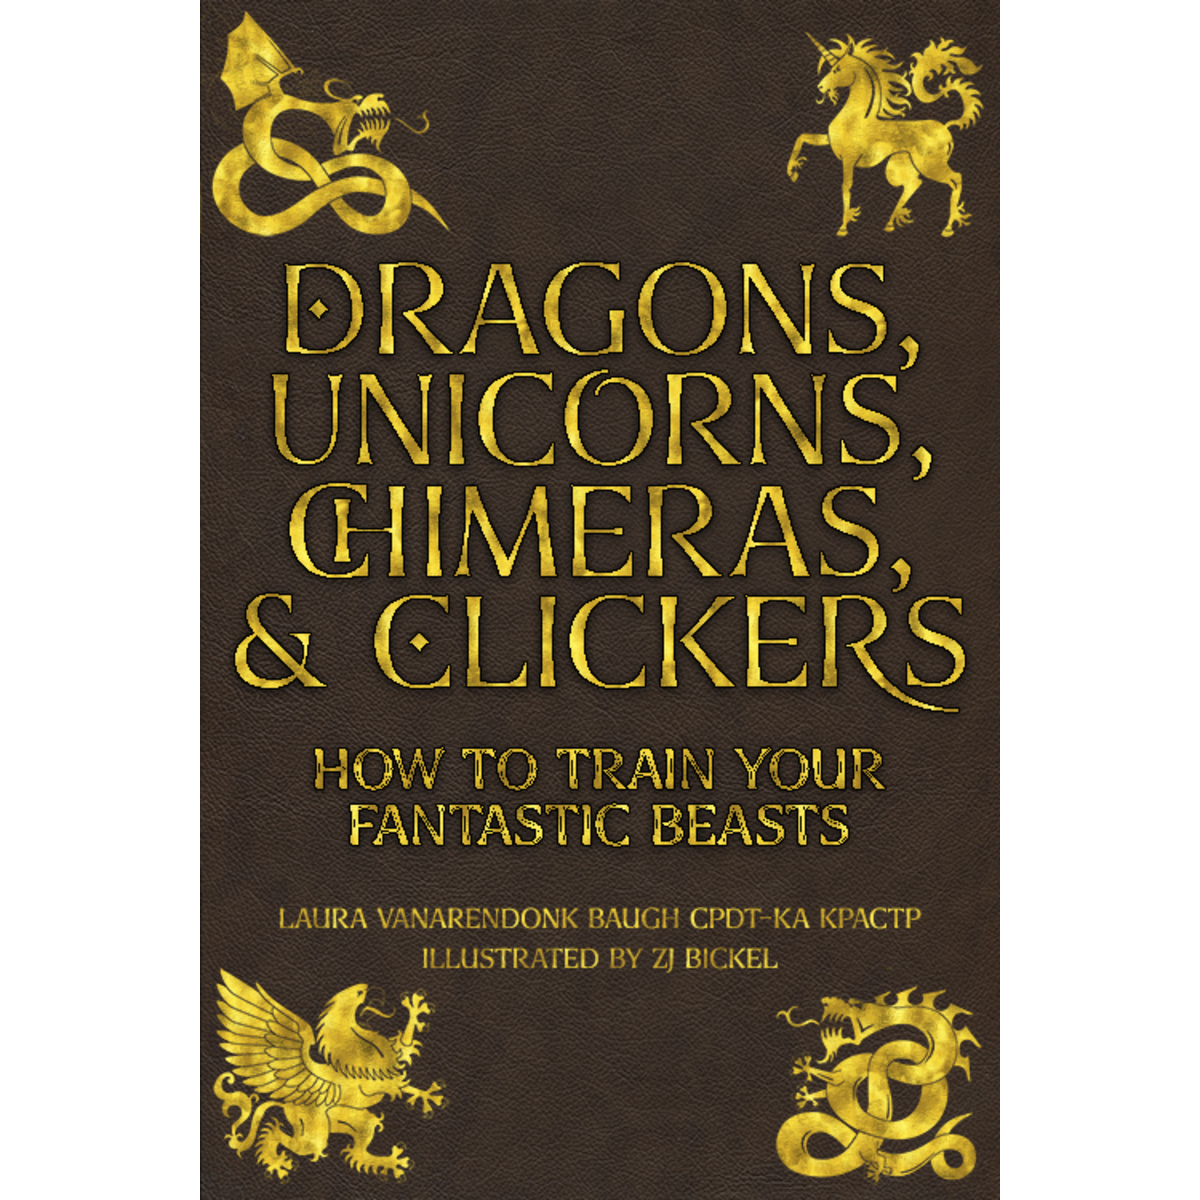 Dragons, Unicorns, Chimeras, & Clickers by Laura VanArendonk Baugh (signed Paperback)